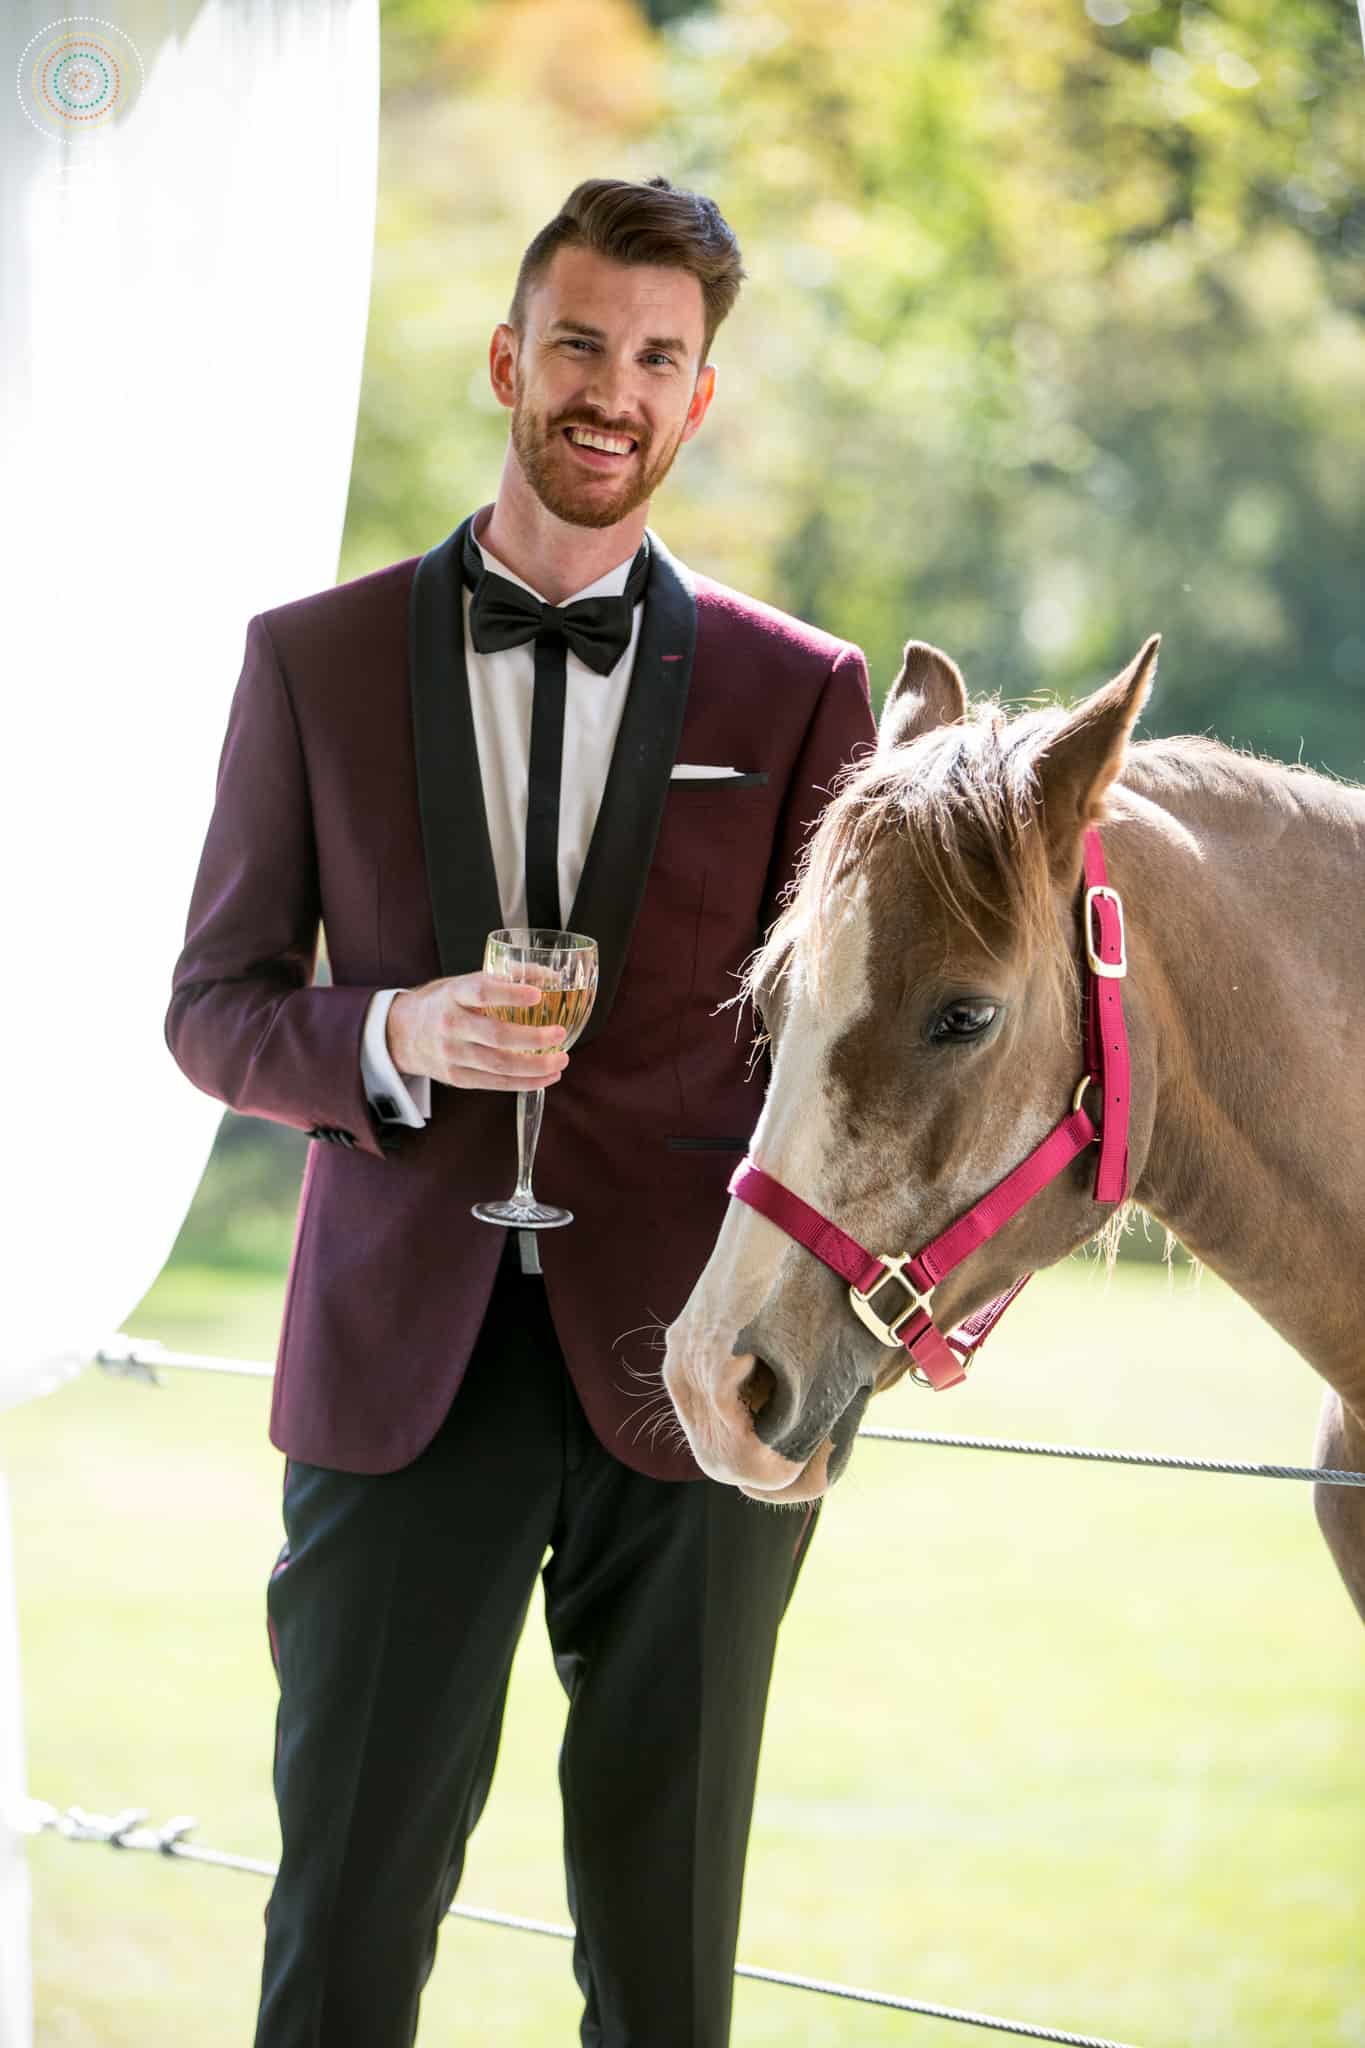 Groom standing next to horse